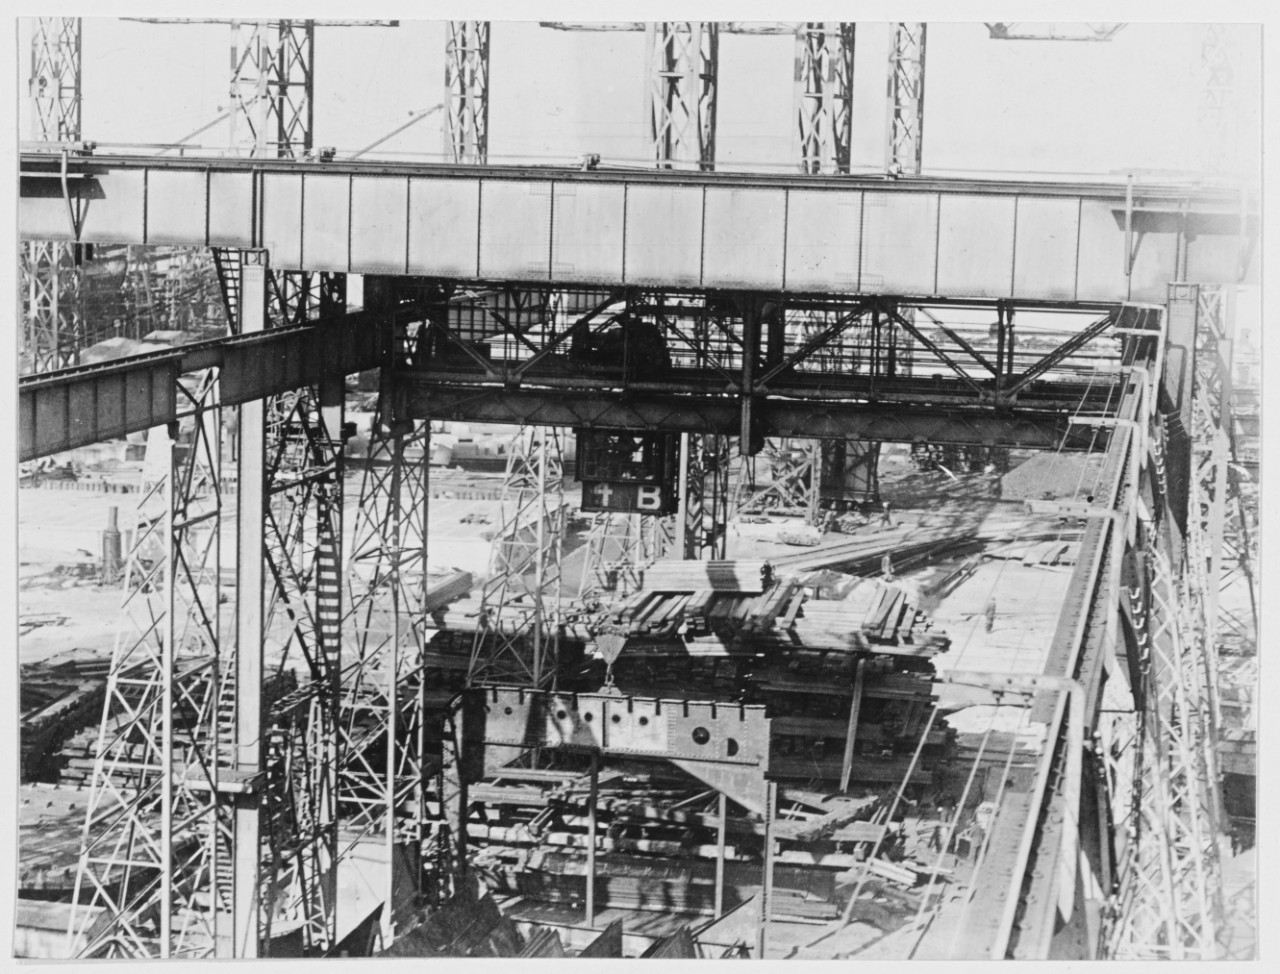 NH 112142 Construction of USS MARYLAND